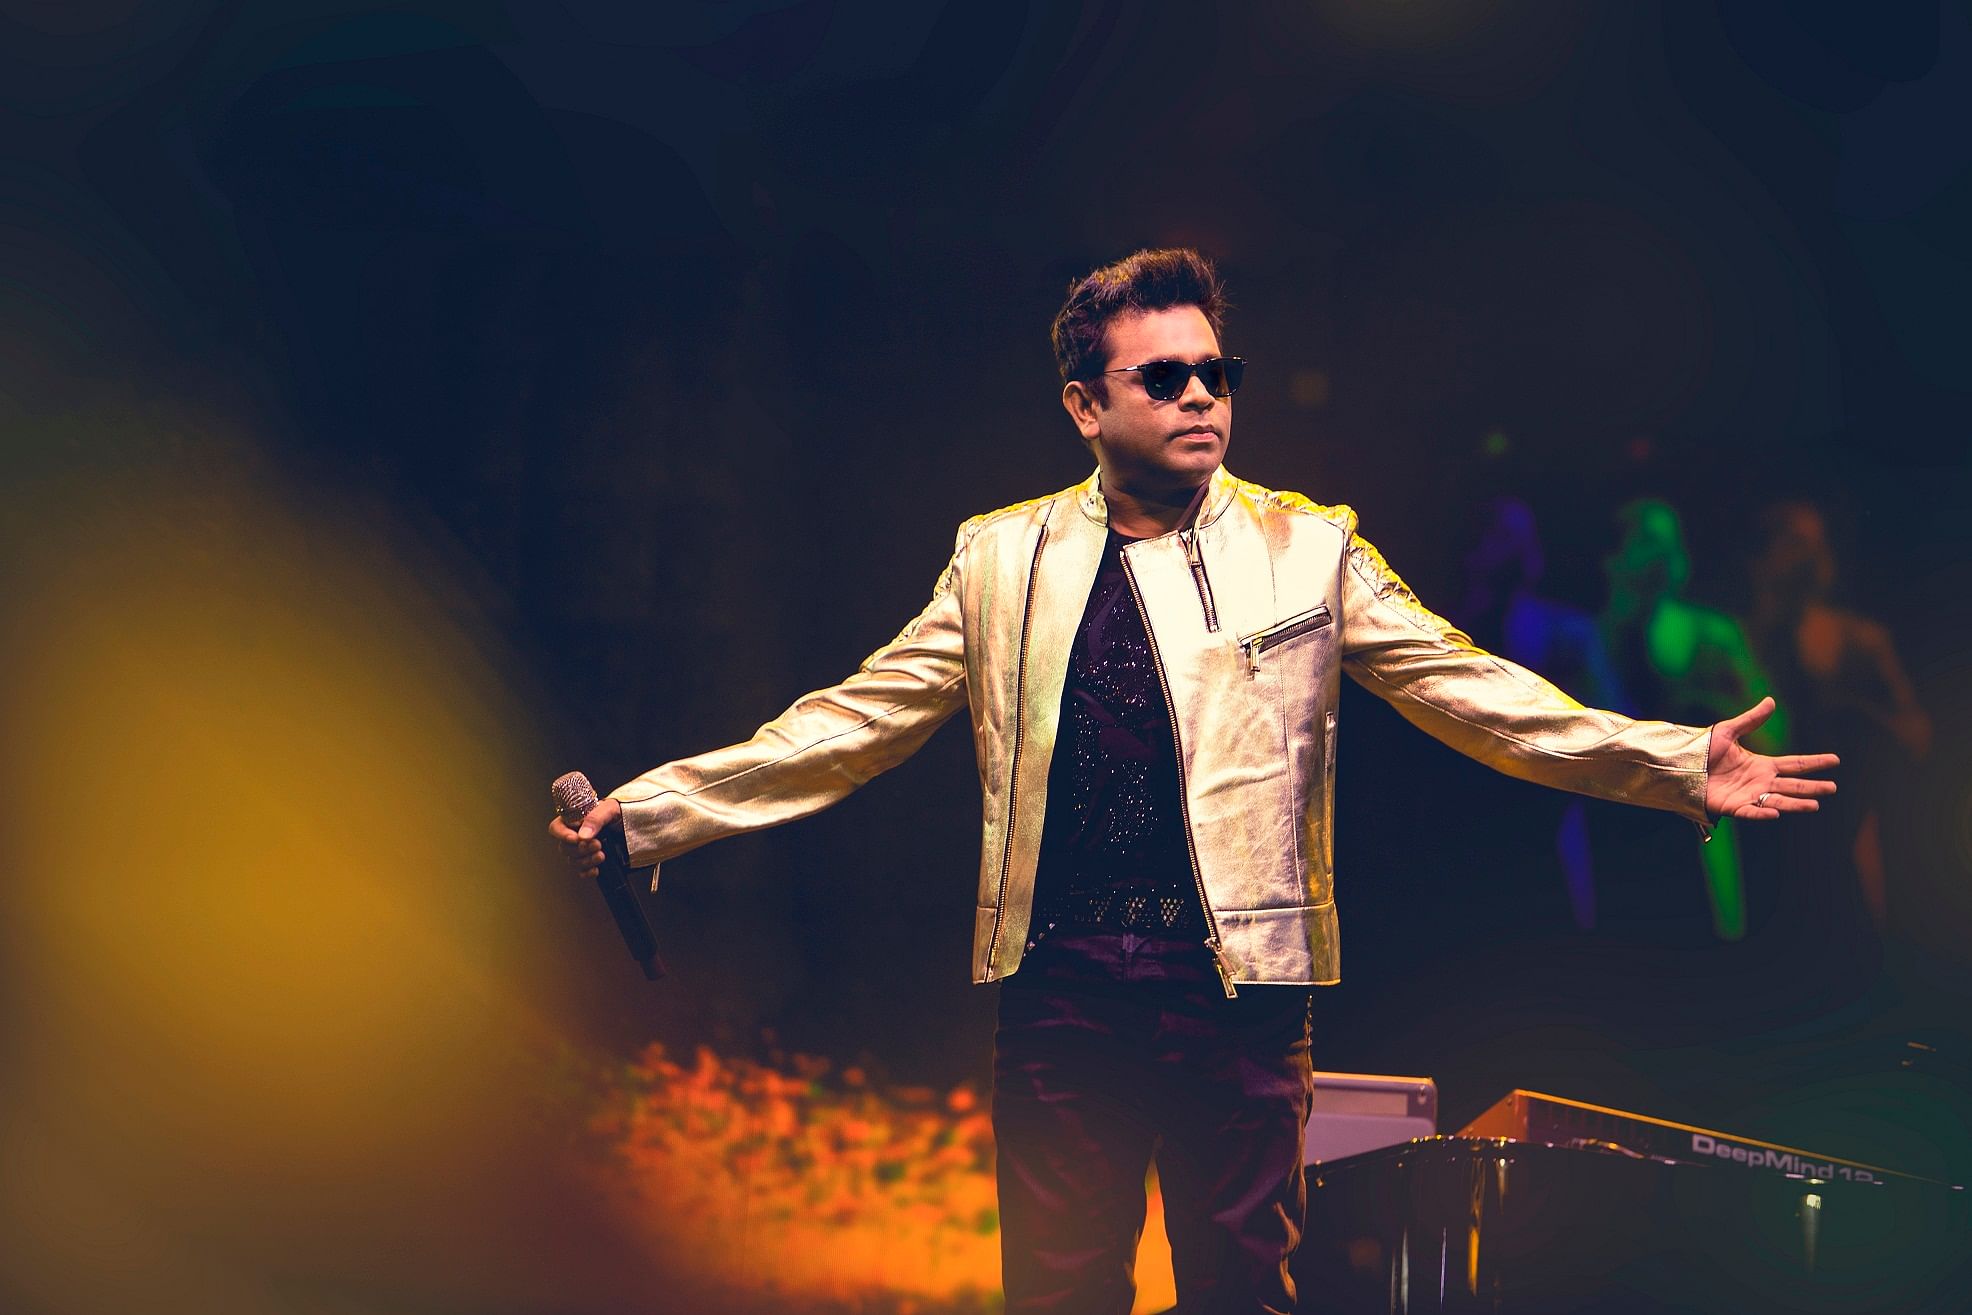 Some of A R Rahman’s songs from the 90s were political in nature, but he has become more apolitical now.